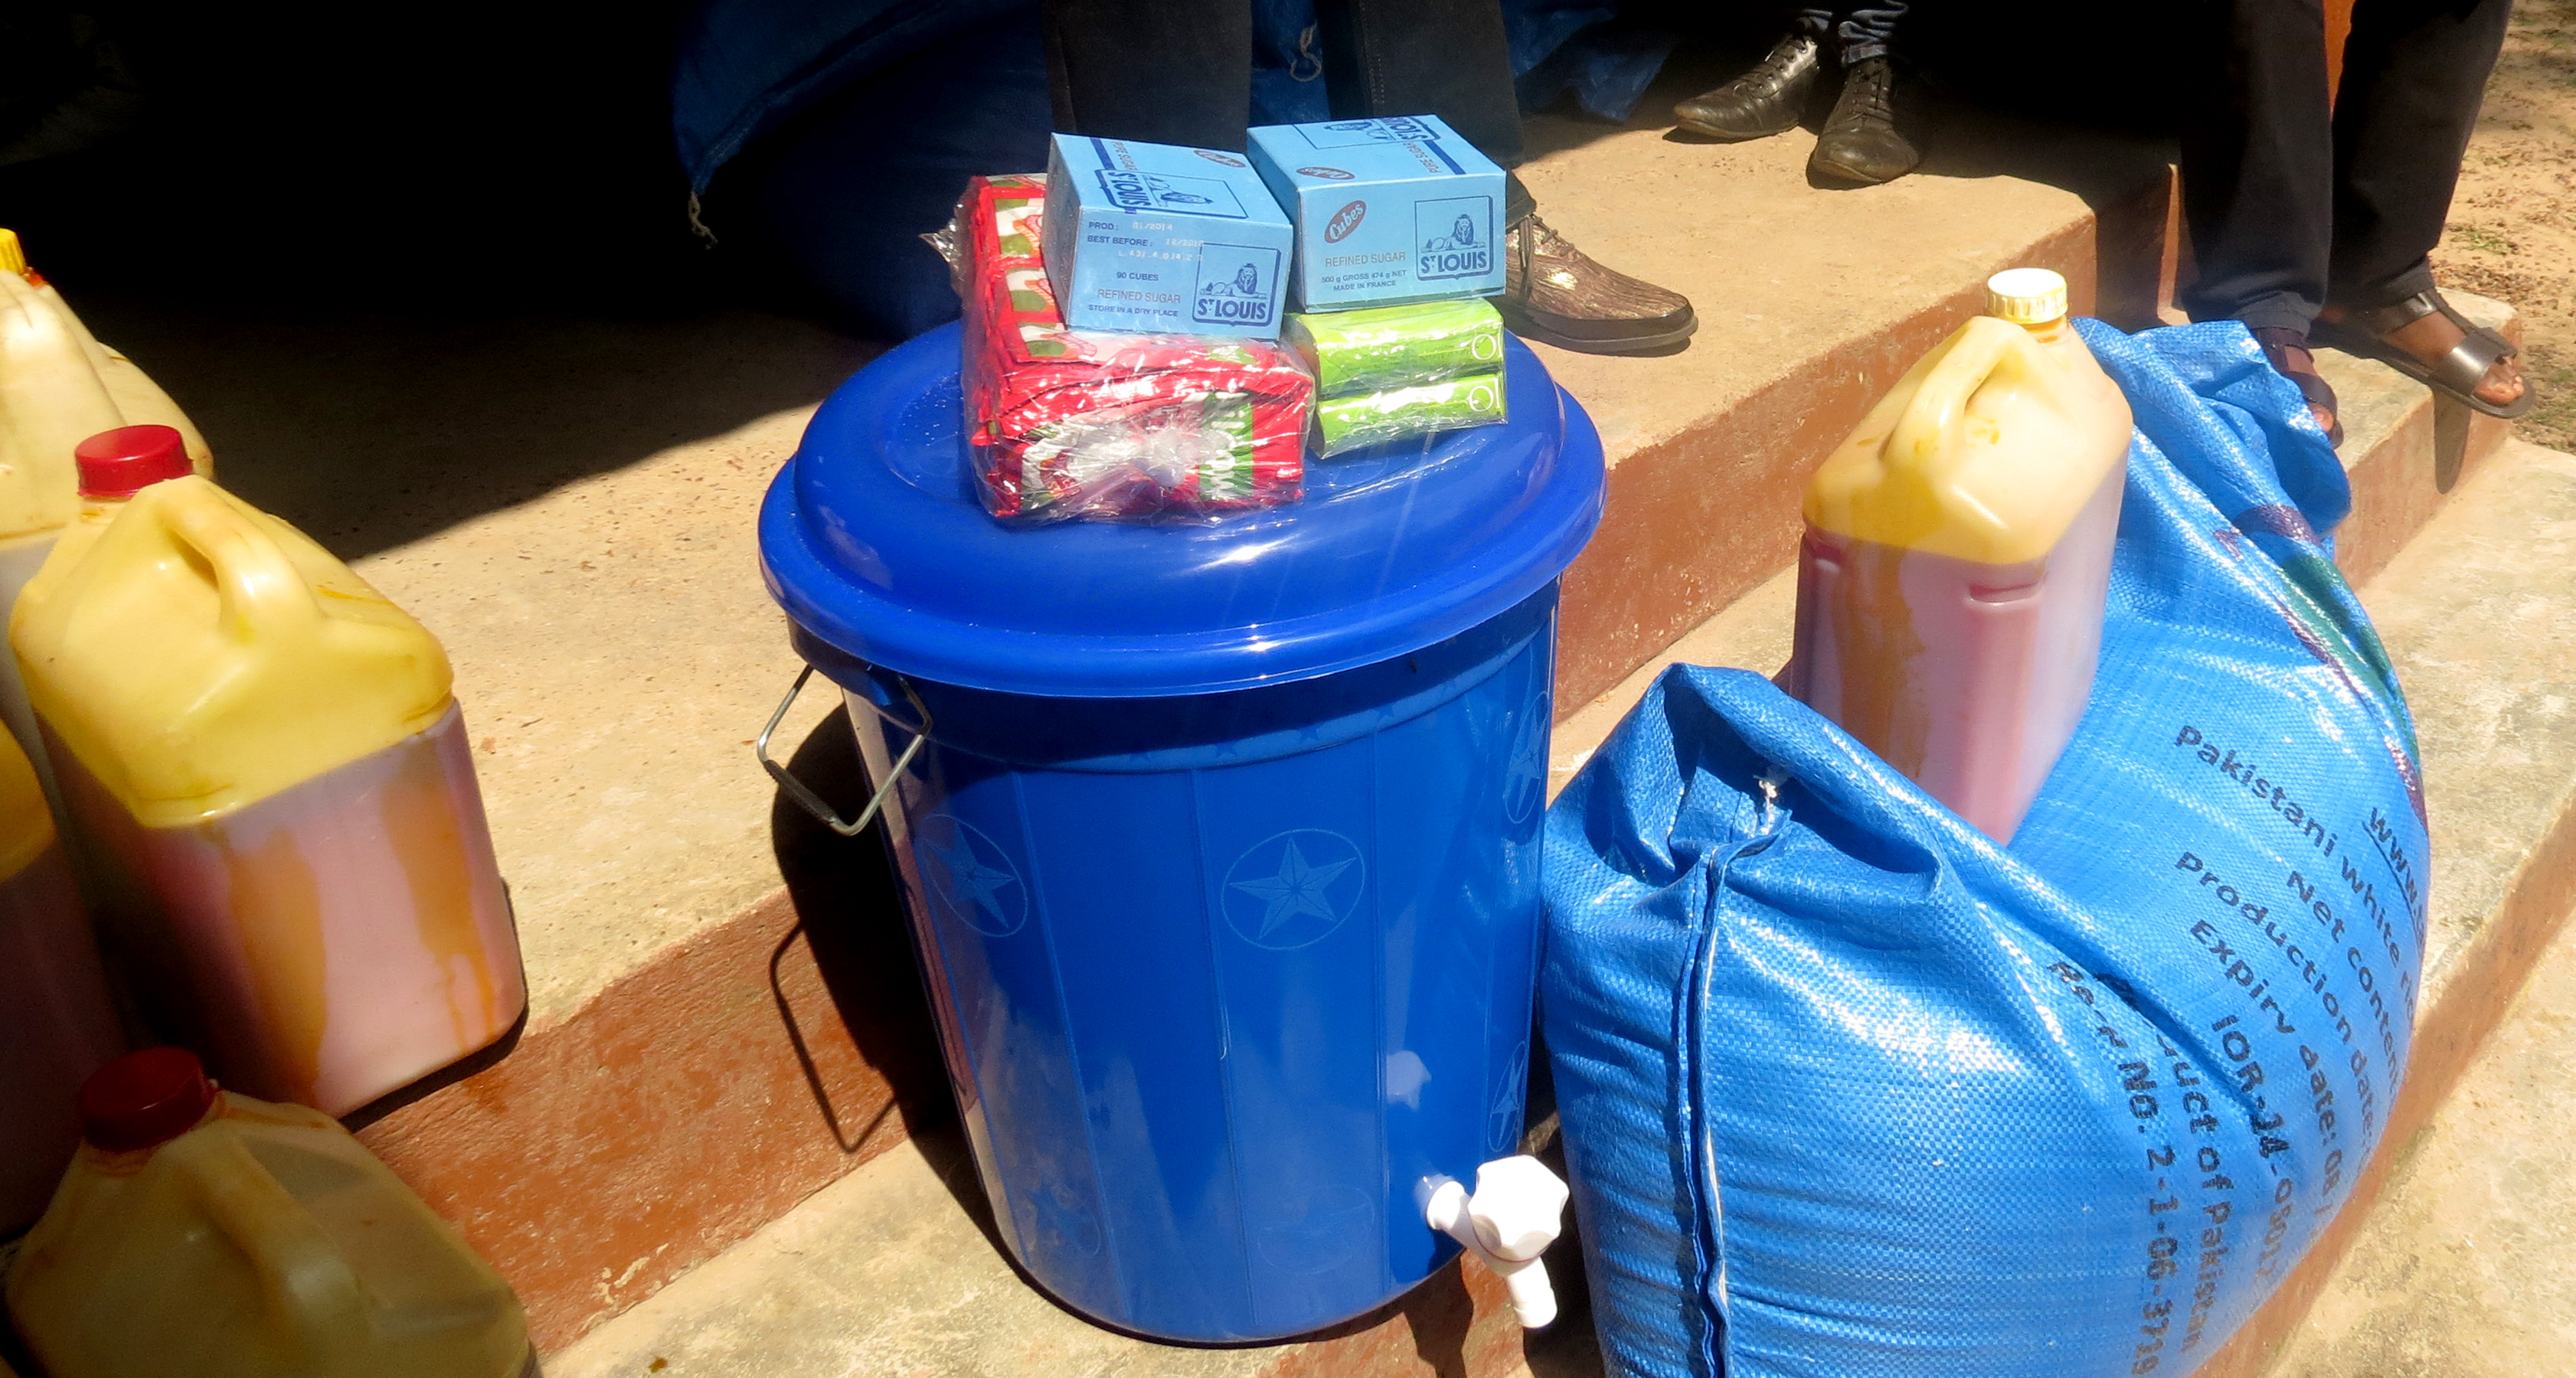 Examples of food and cleaning supplies being distributed to quarantined families.